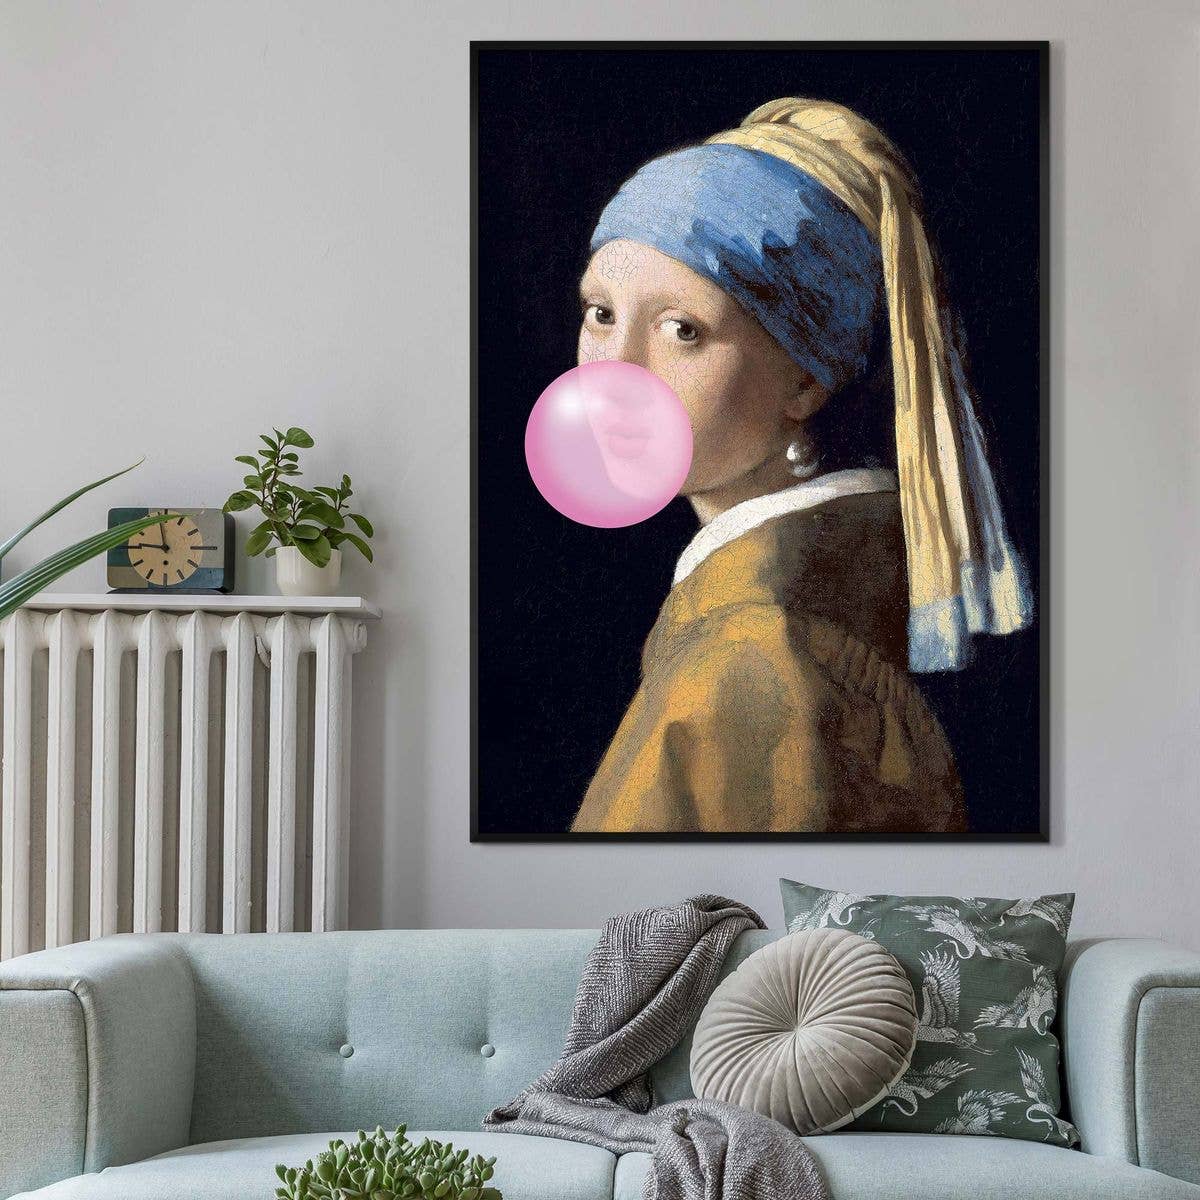 The Girl with the Bubble